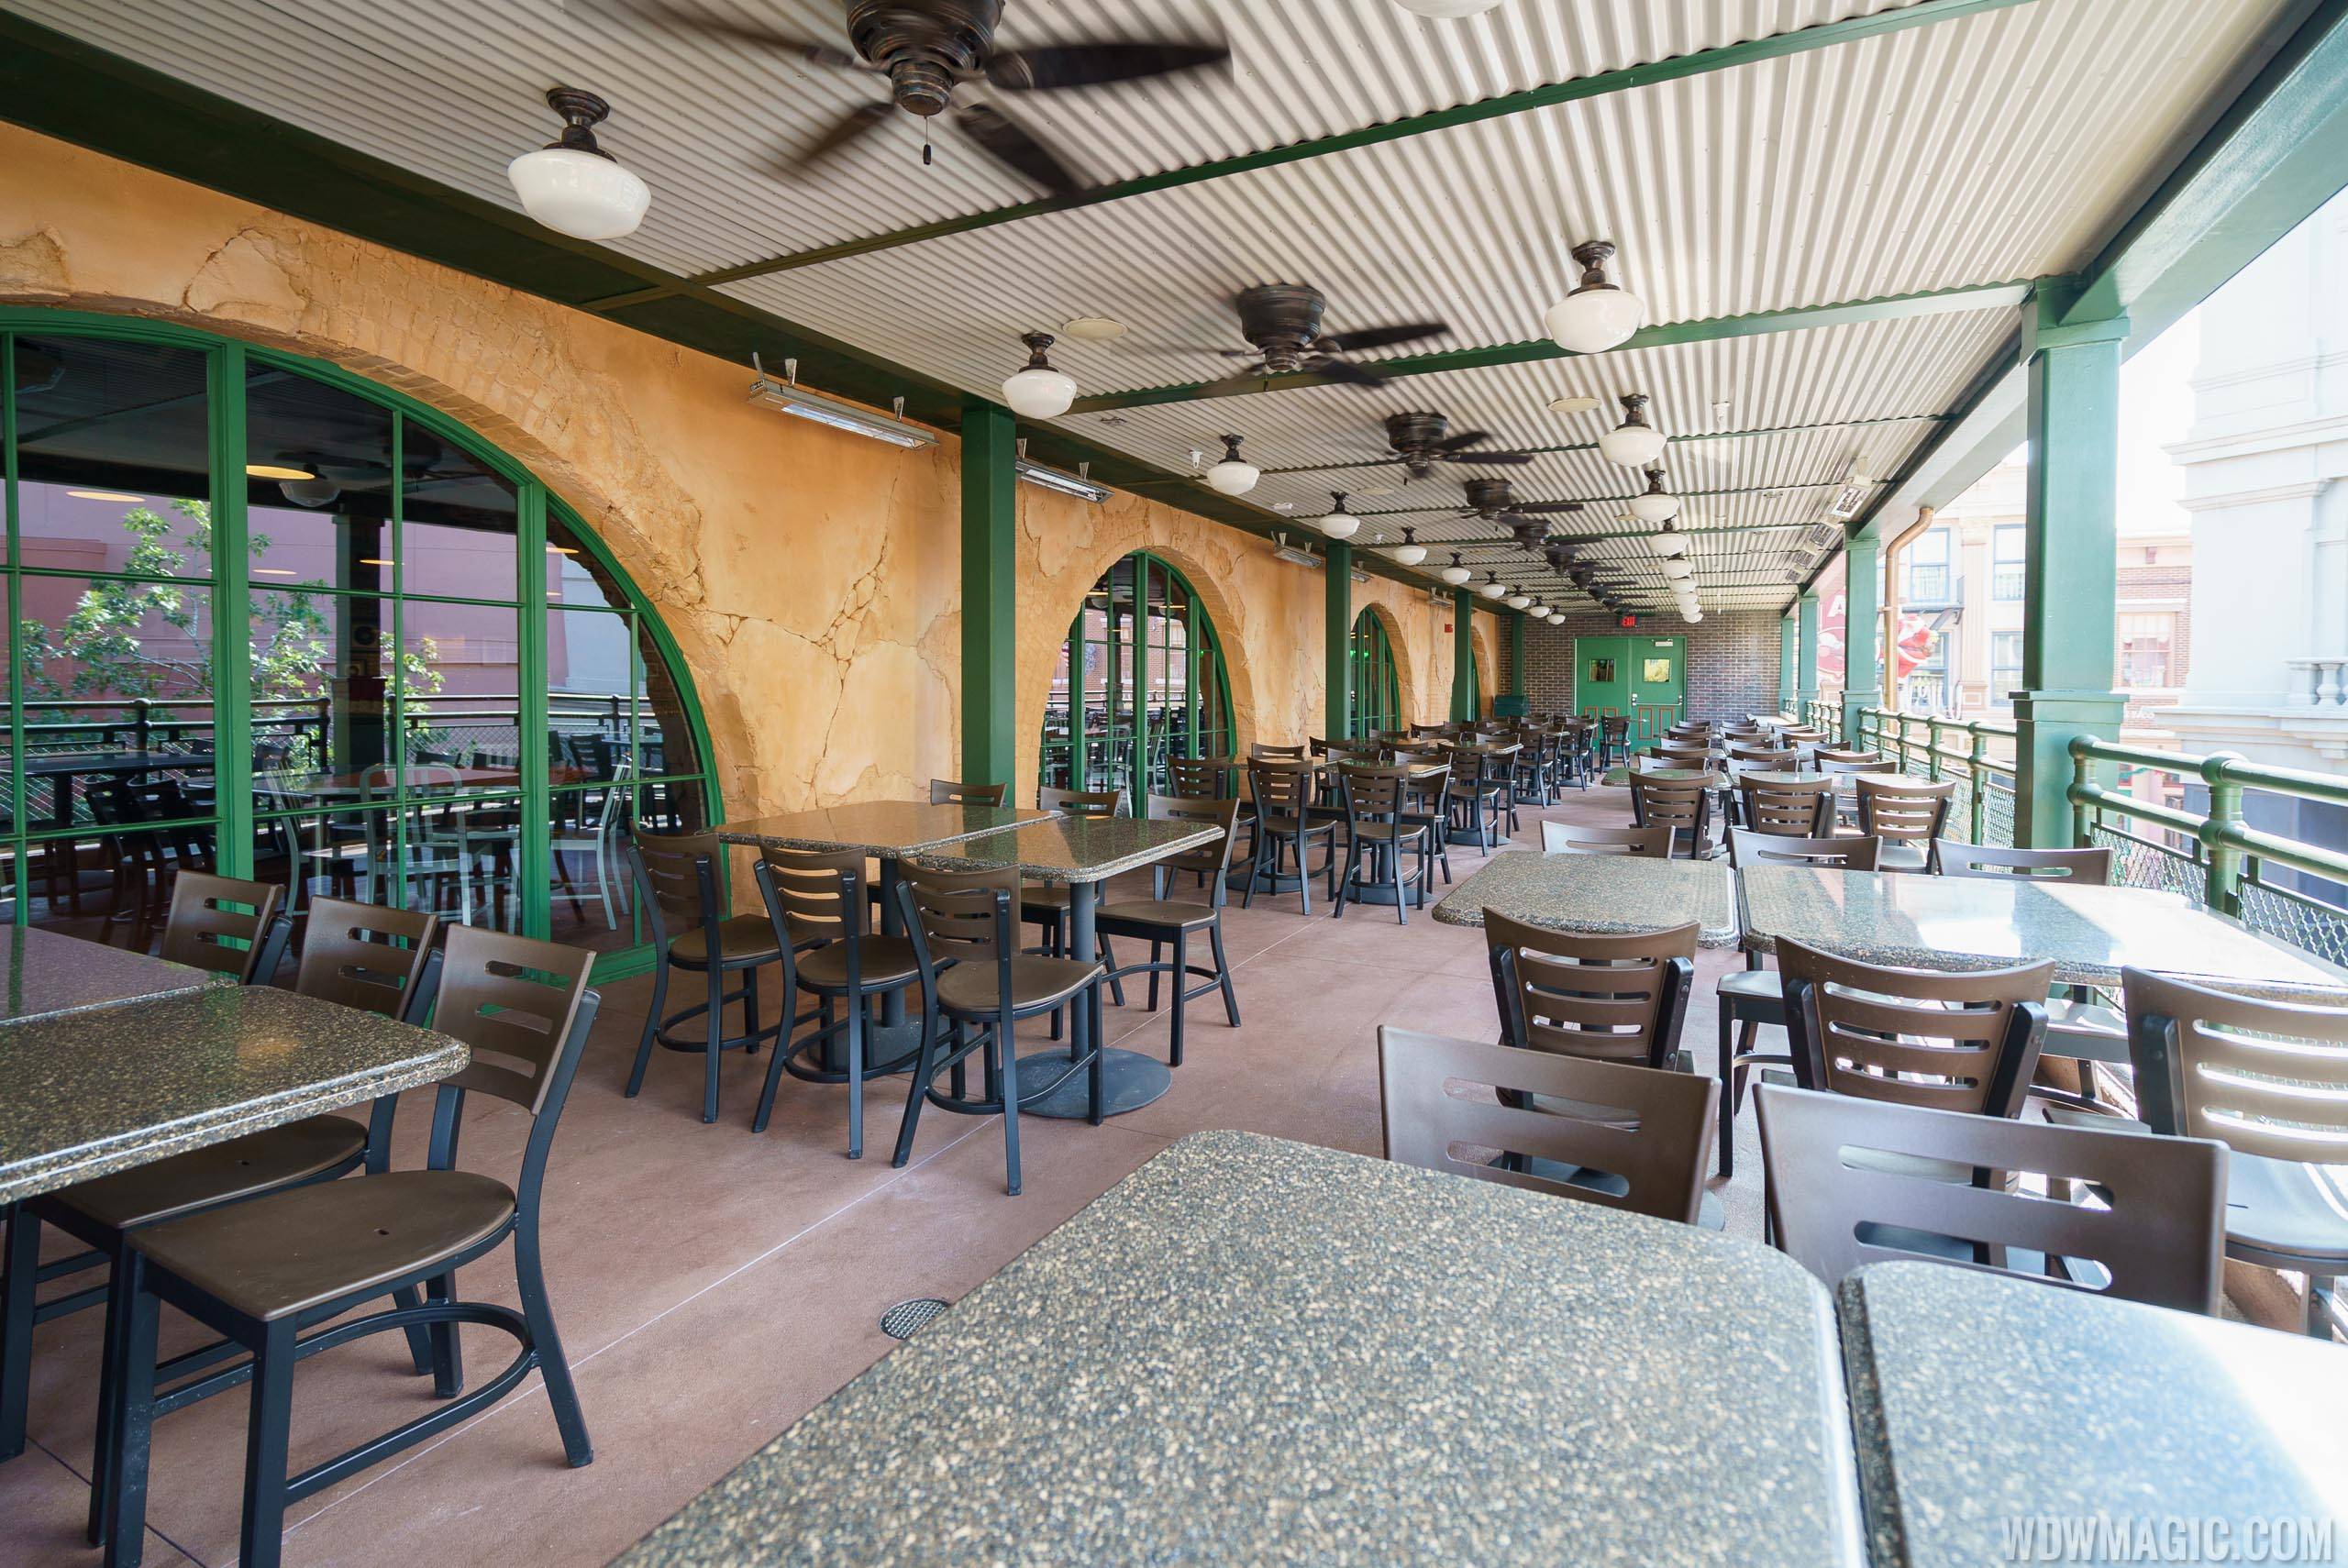 Inside PizzeRizzo - Second level outdoor balcony dining